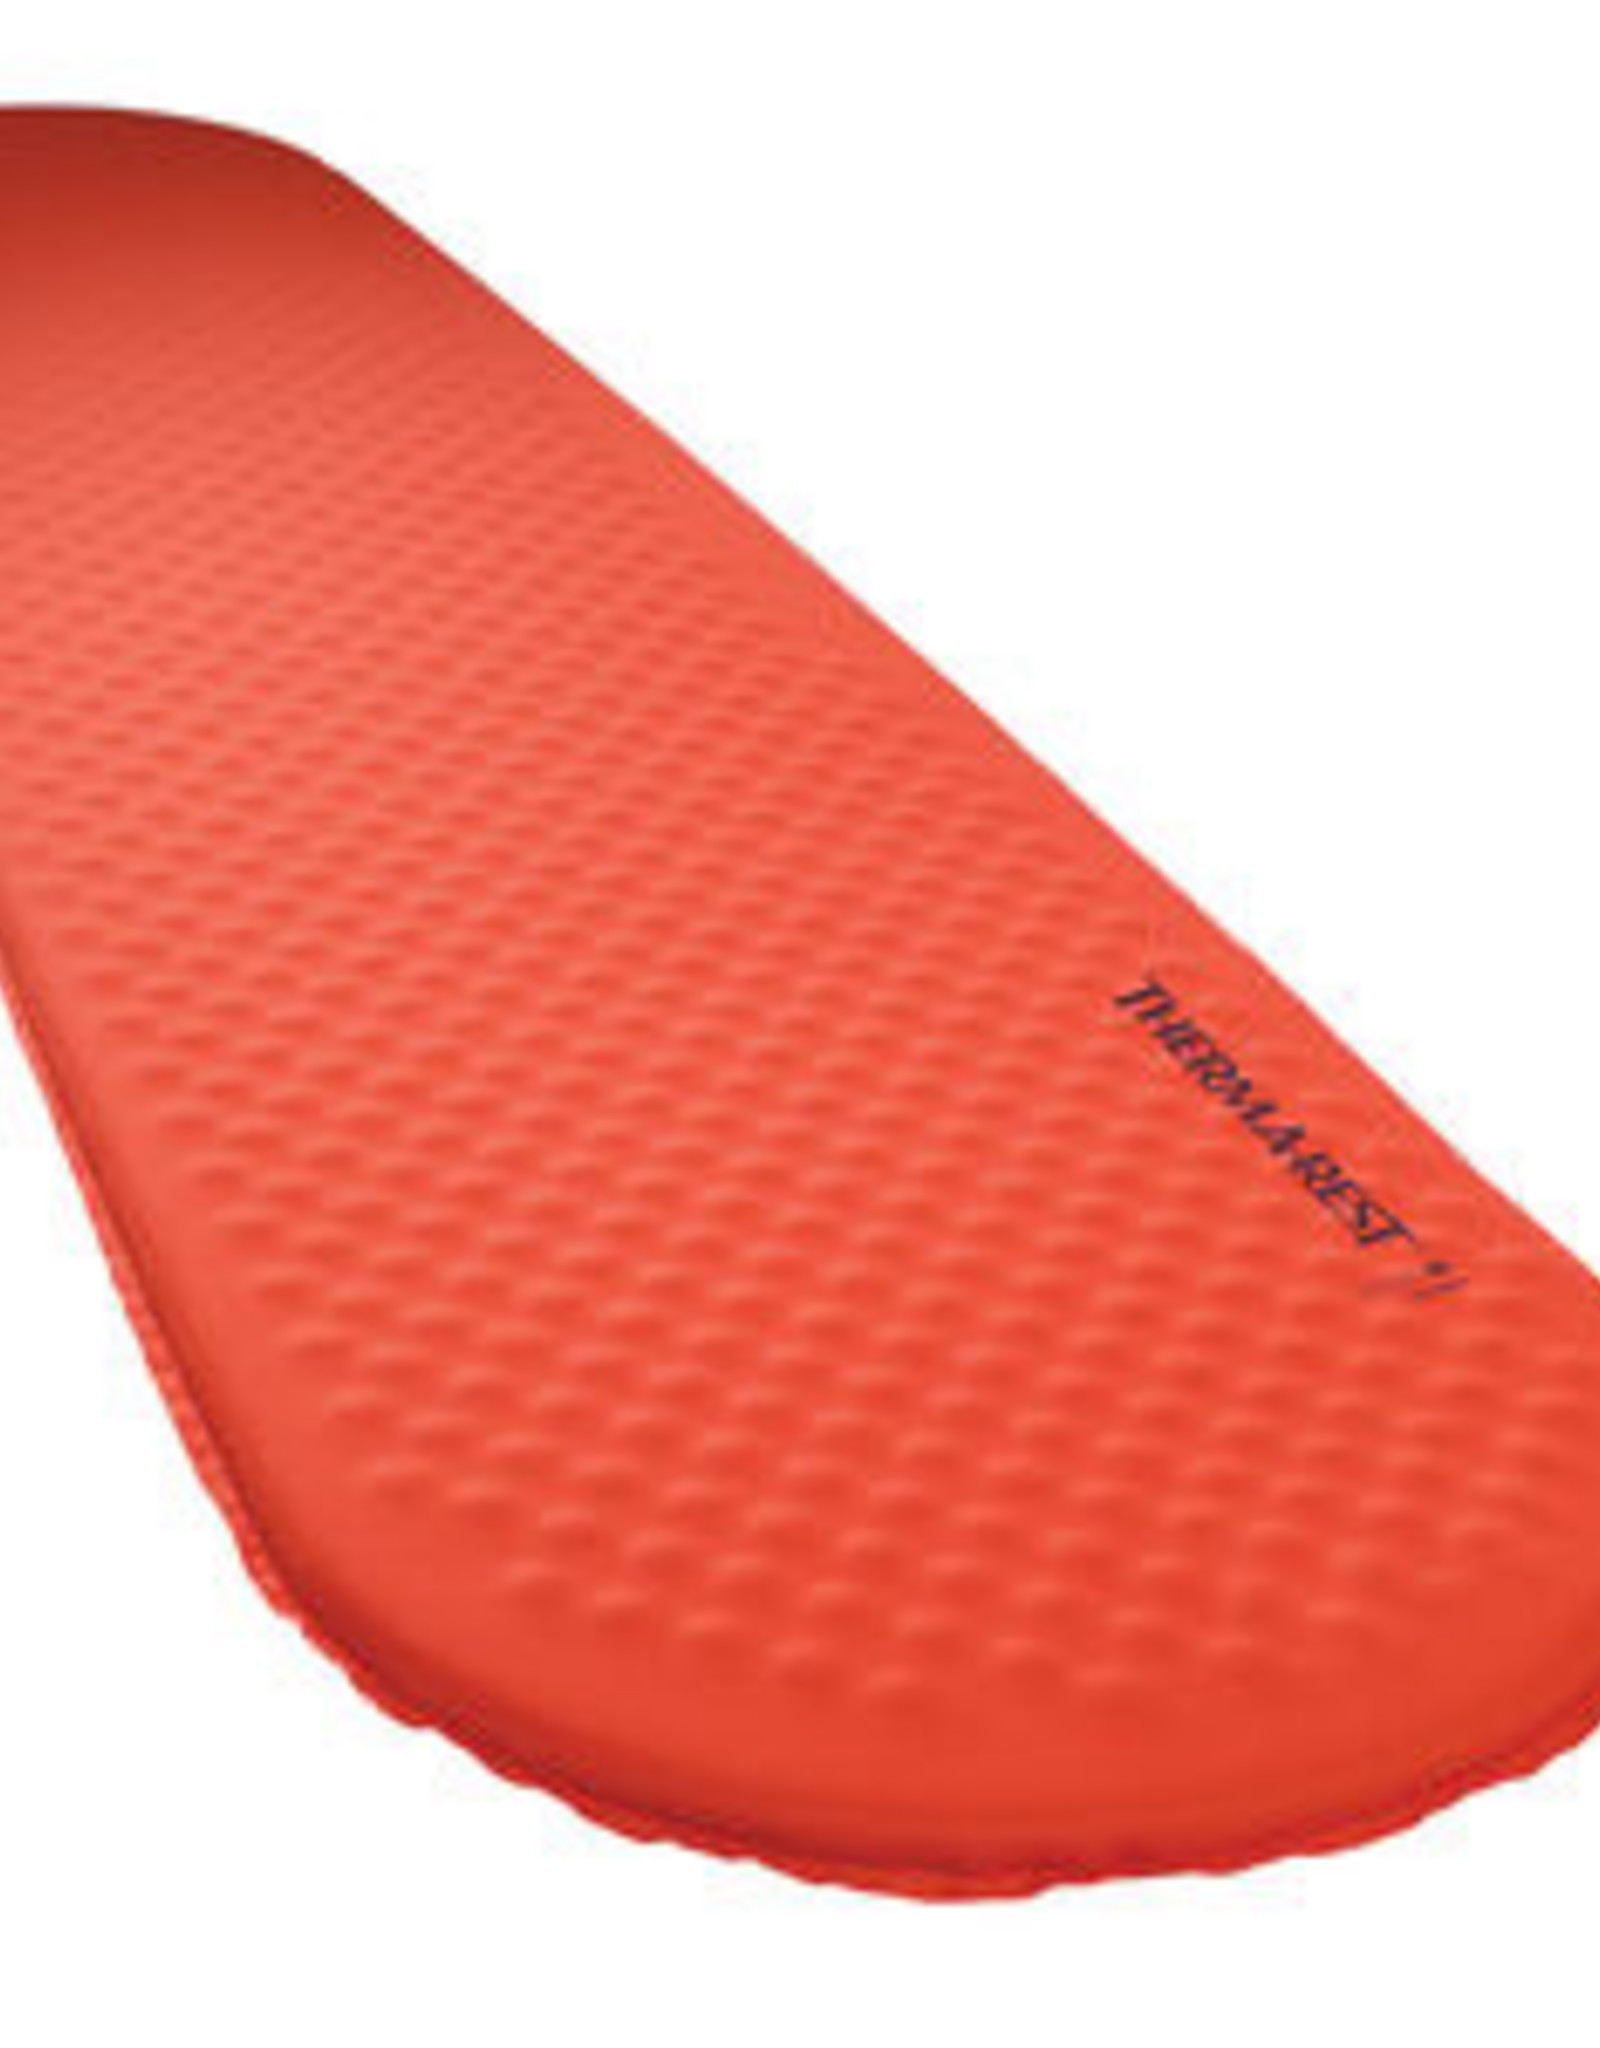 Therm-a-Rest Therm-a-rest ProLite Sleeping Pad Poppy Long